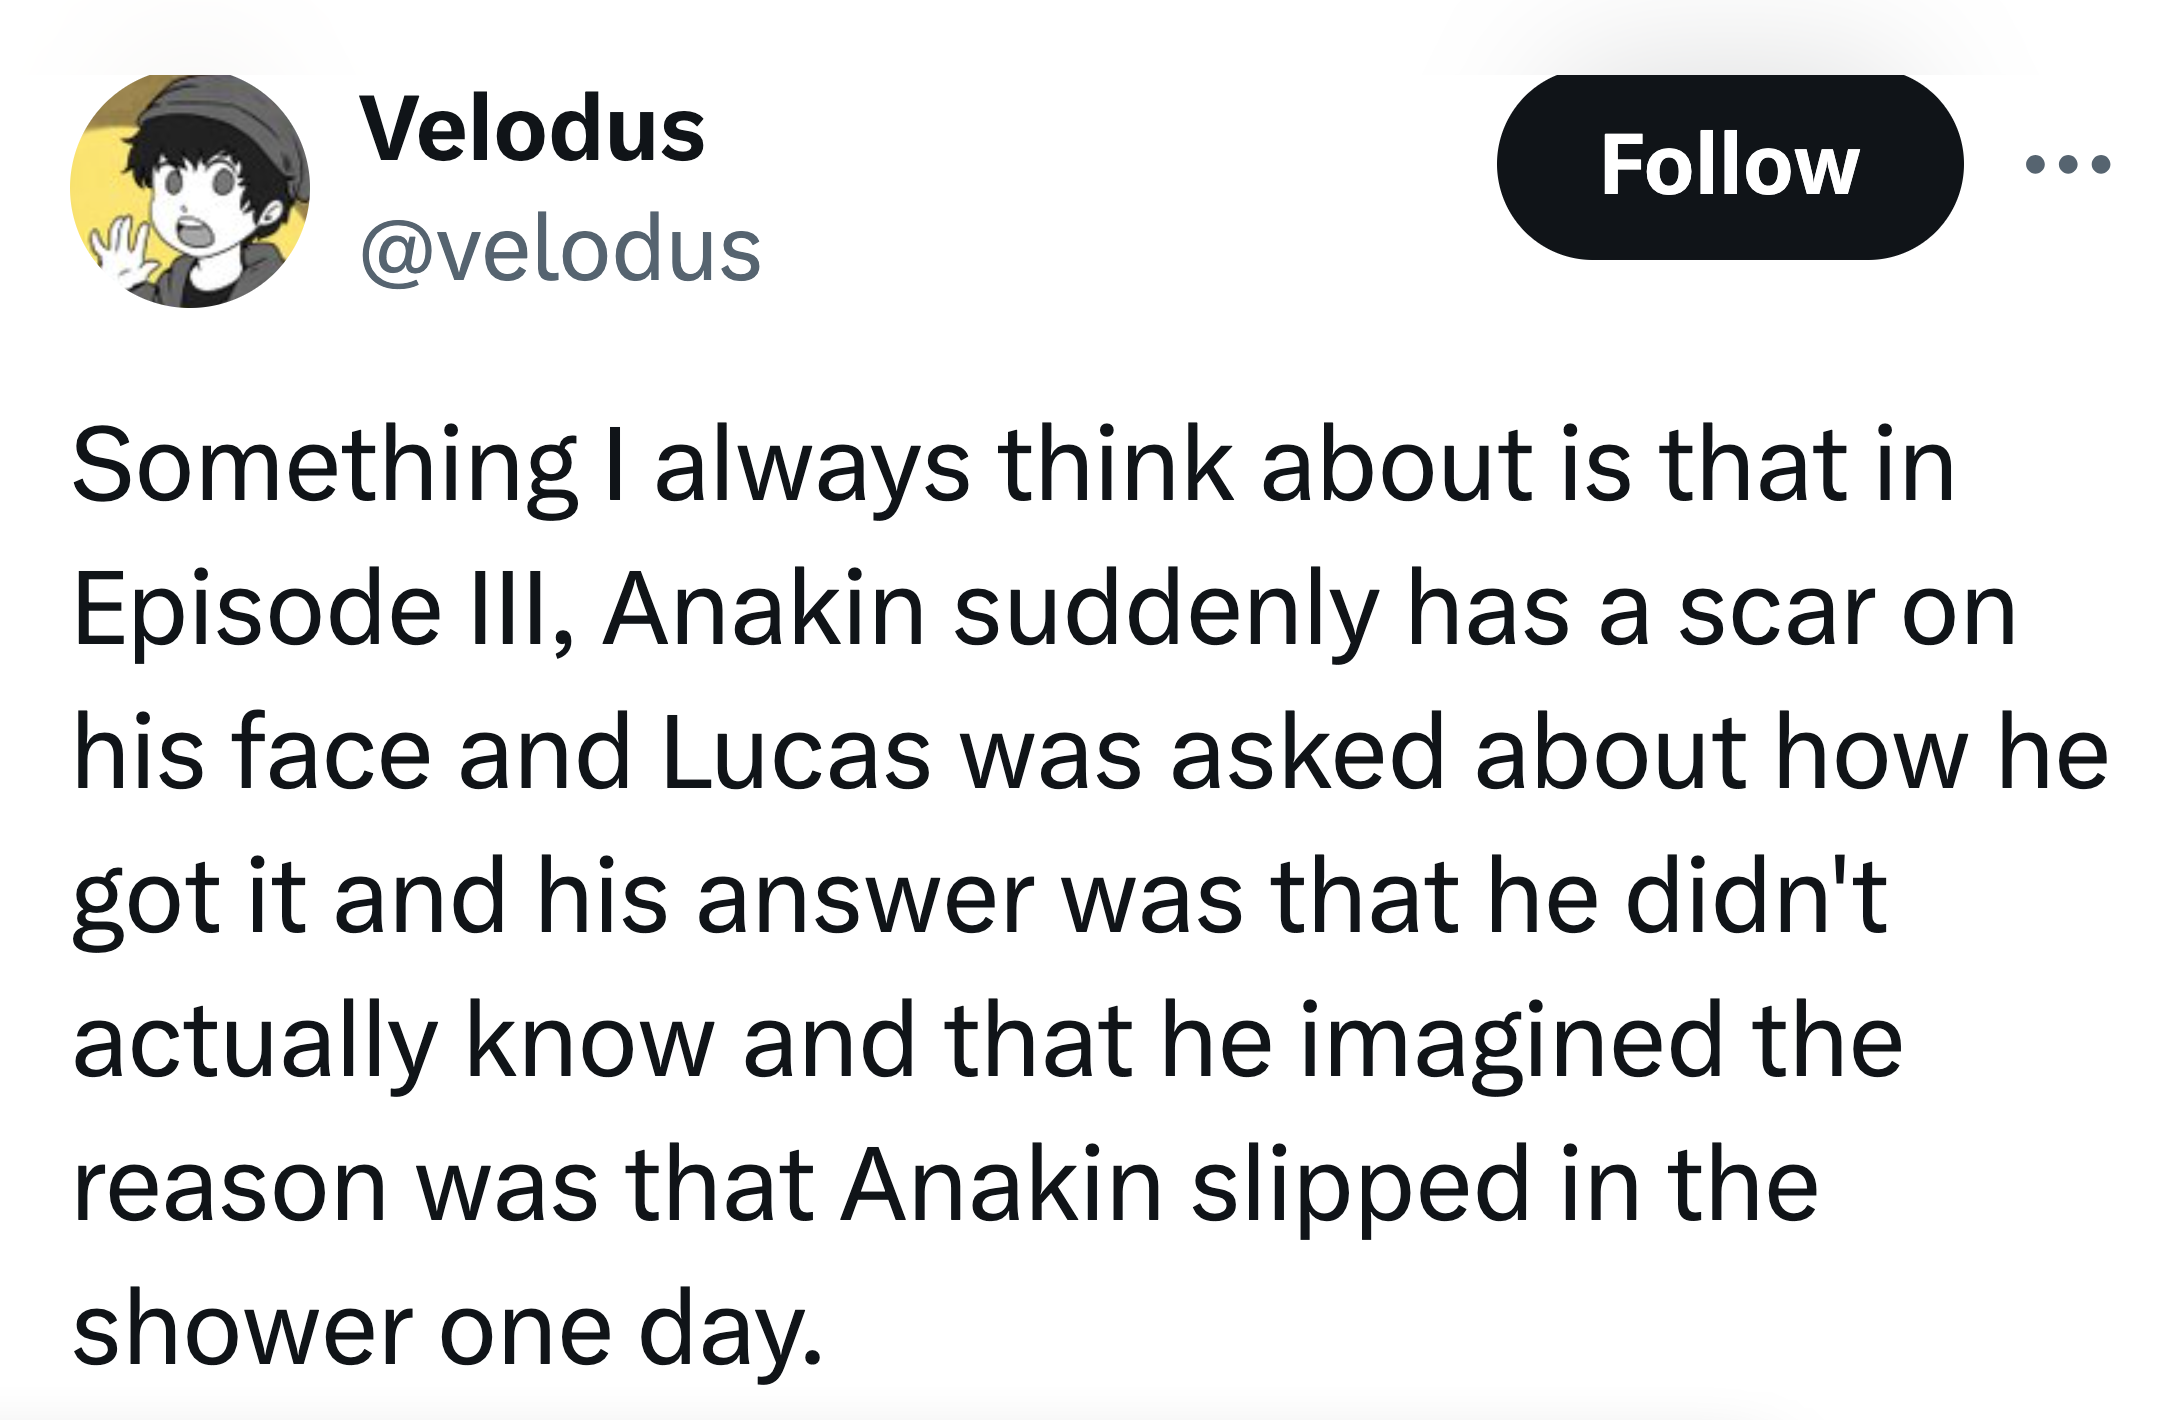 screenshot - Velodus Something I always think about is that in Episode Iii, Anakin suddenly has a scar on his face and Lucas was asked about how he got it and his answer was that he didn't actually know and that he imagined the reason was that Anakin slip